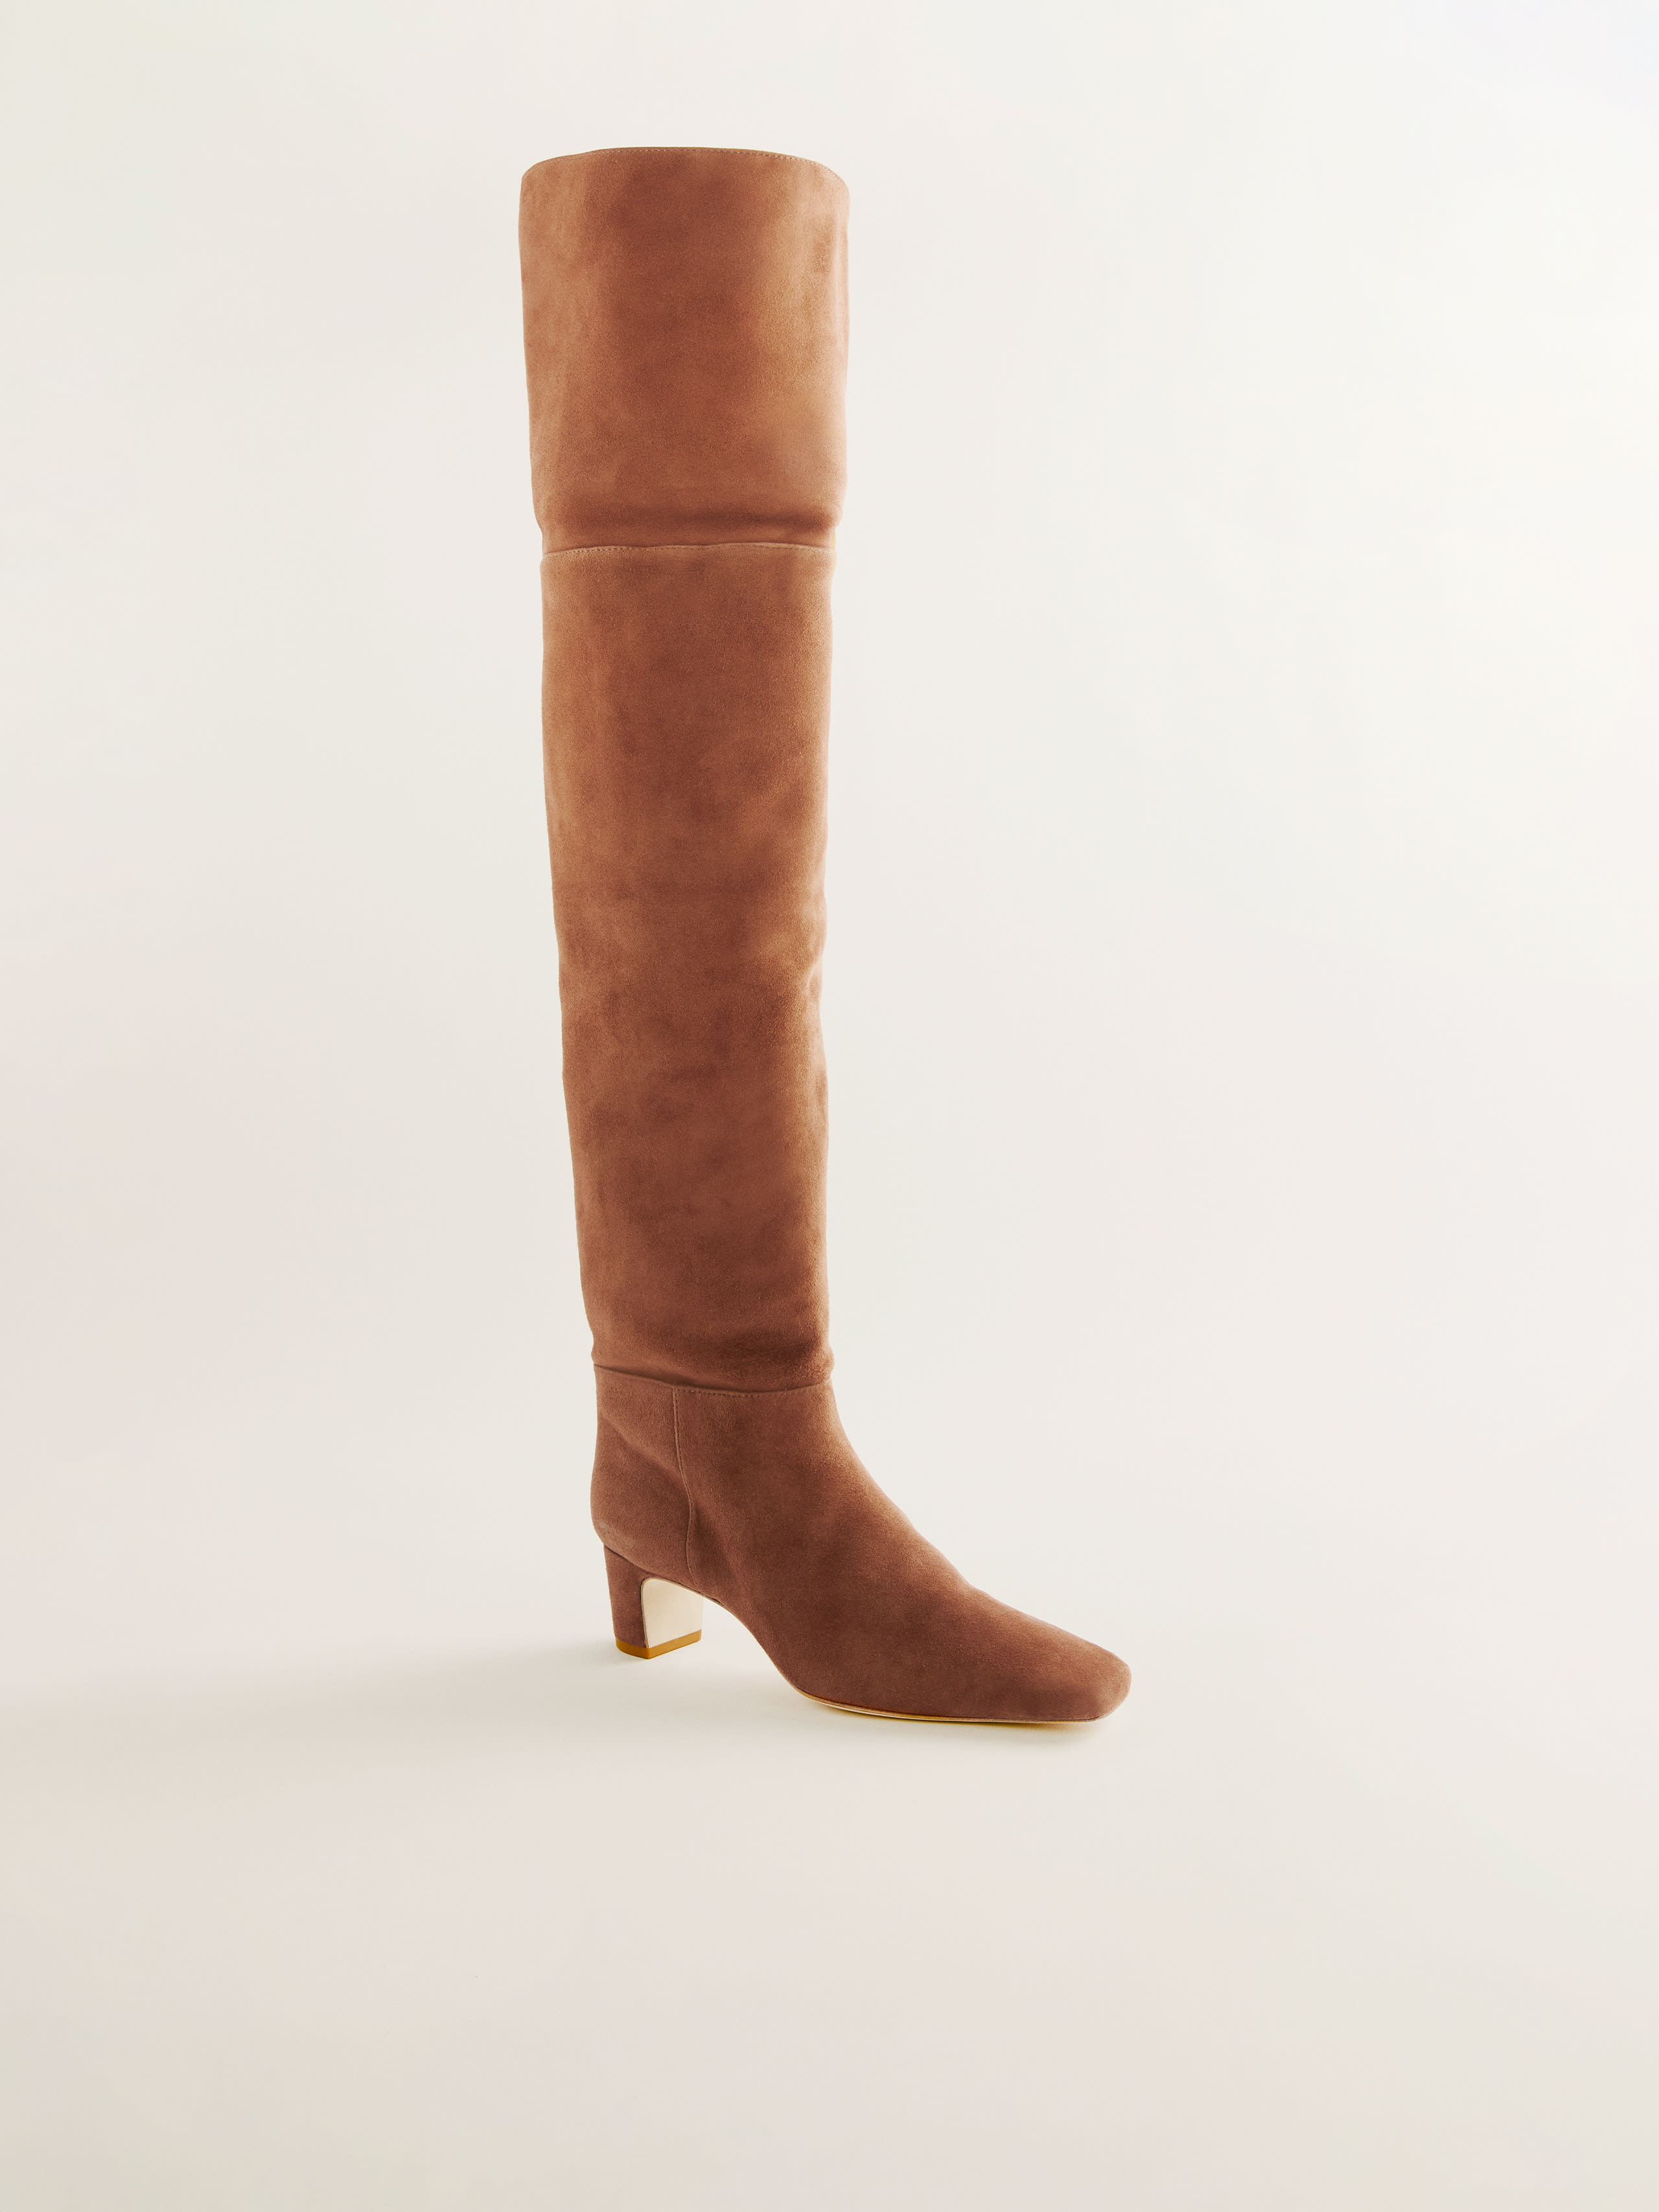 Reiss Over The Knee Boot, thumbnail image 4